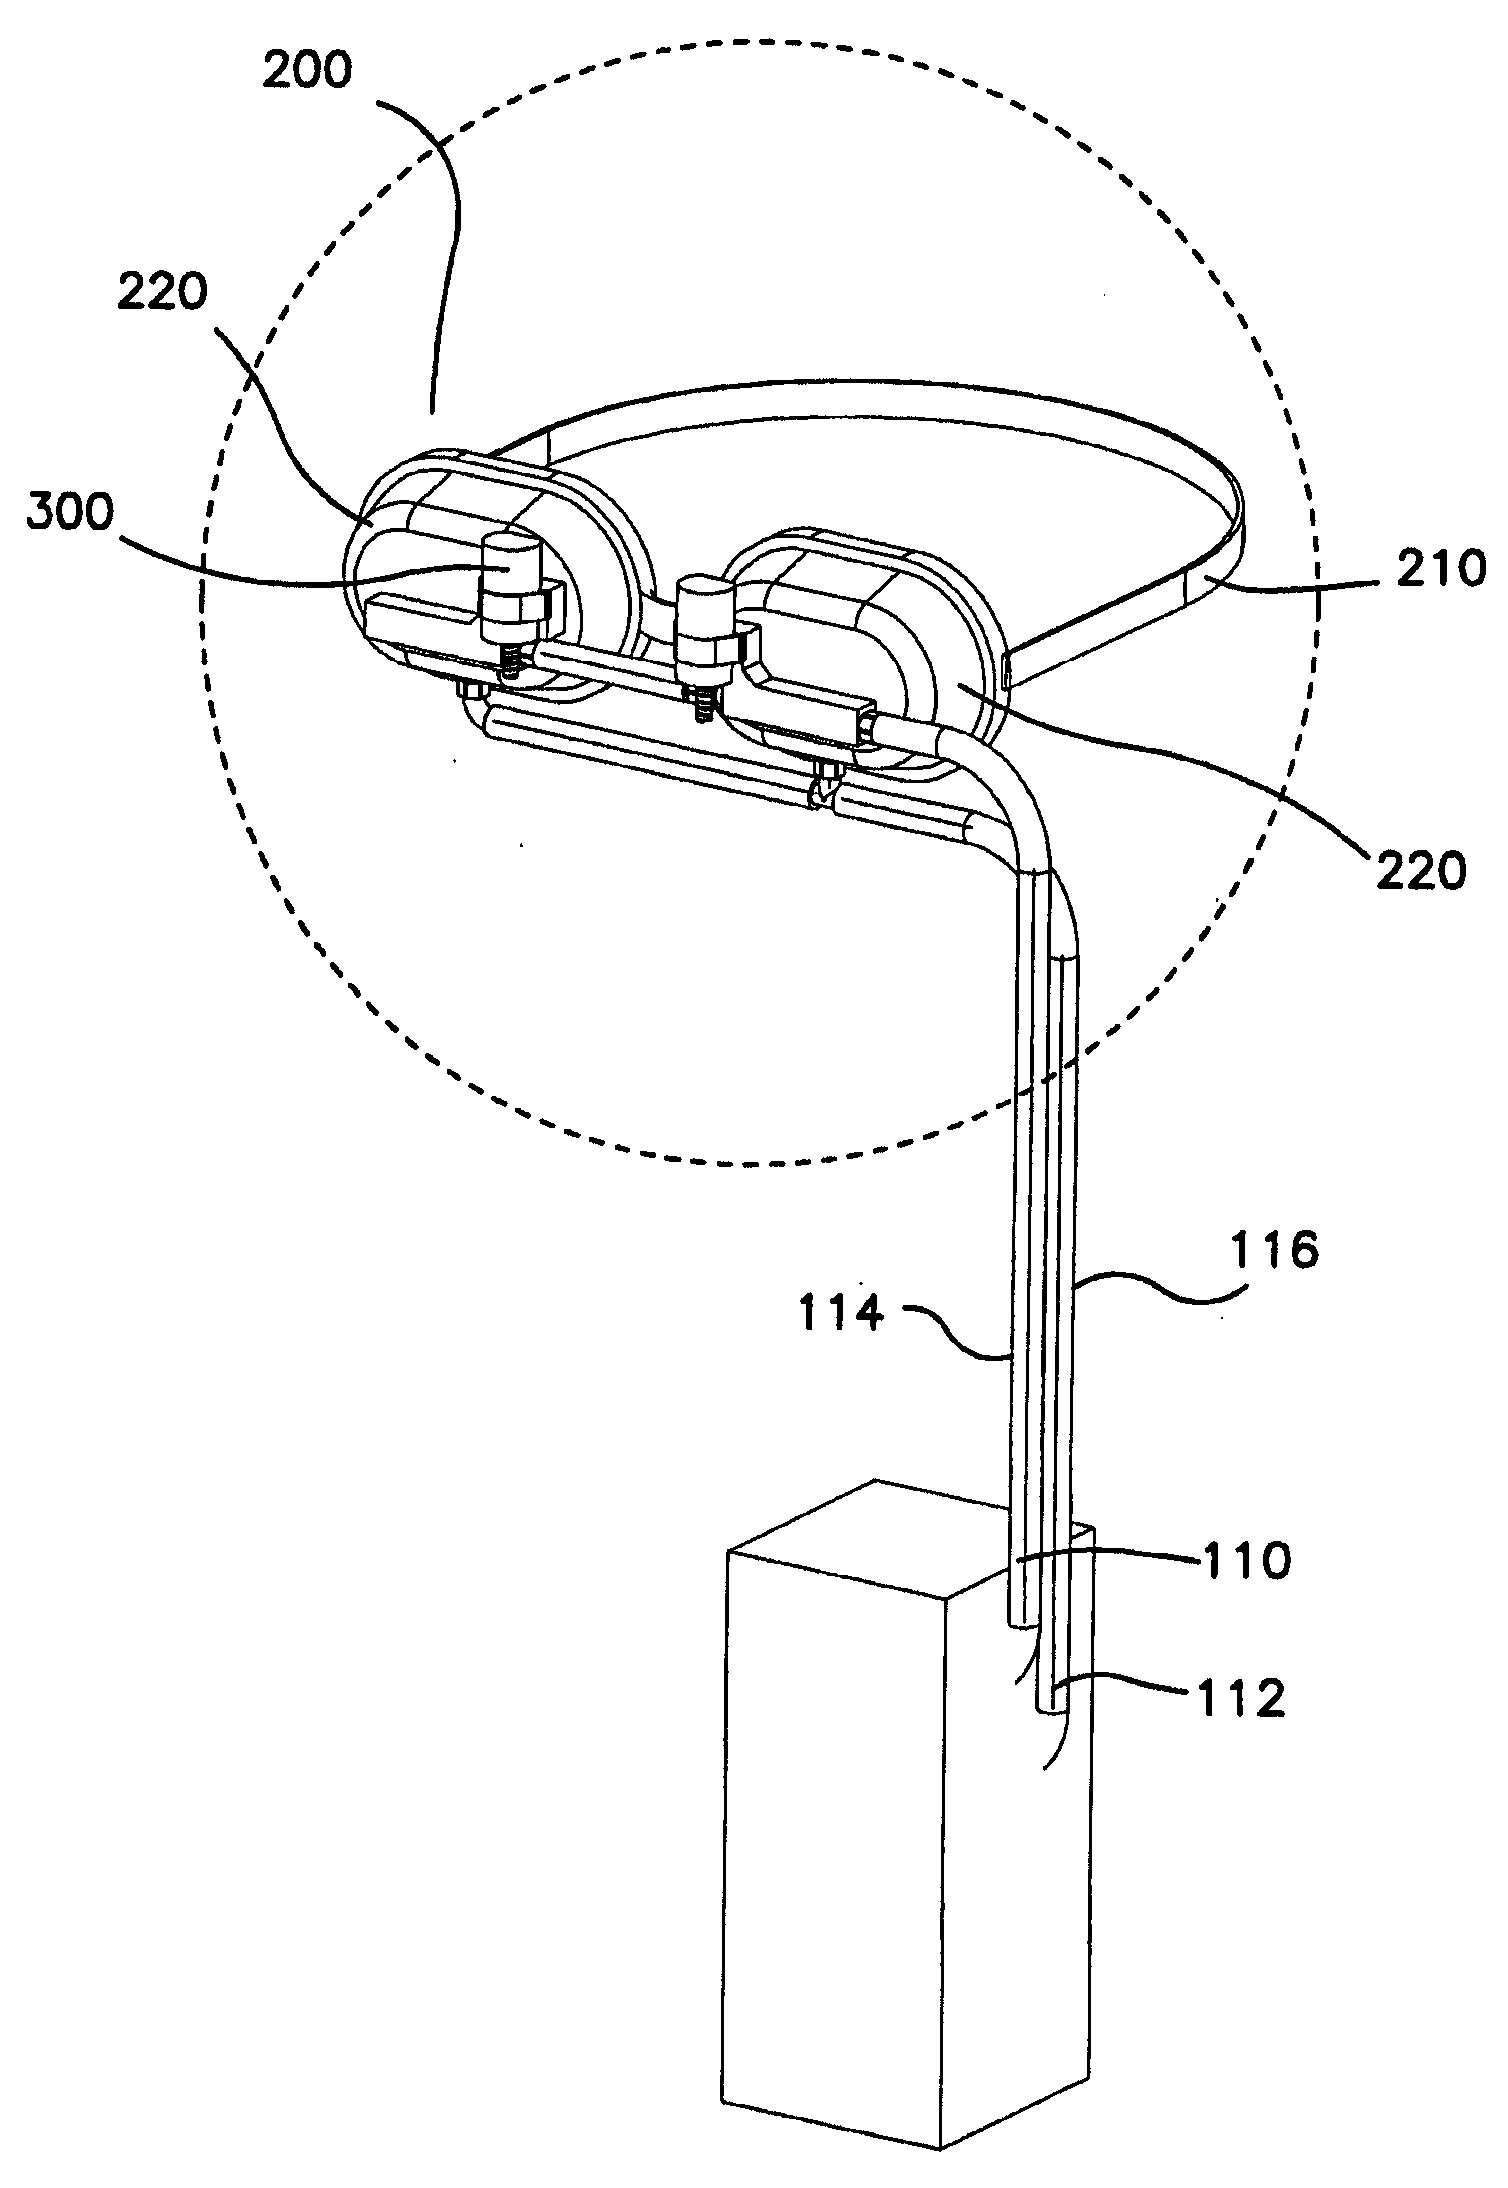 Method and apparatus for treating meibomian gland dysfunction employing fluid jet